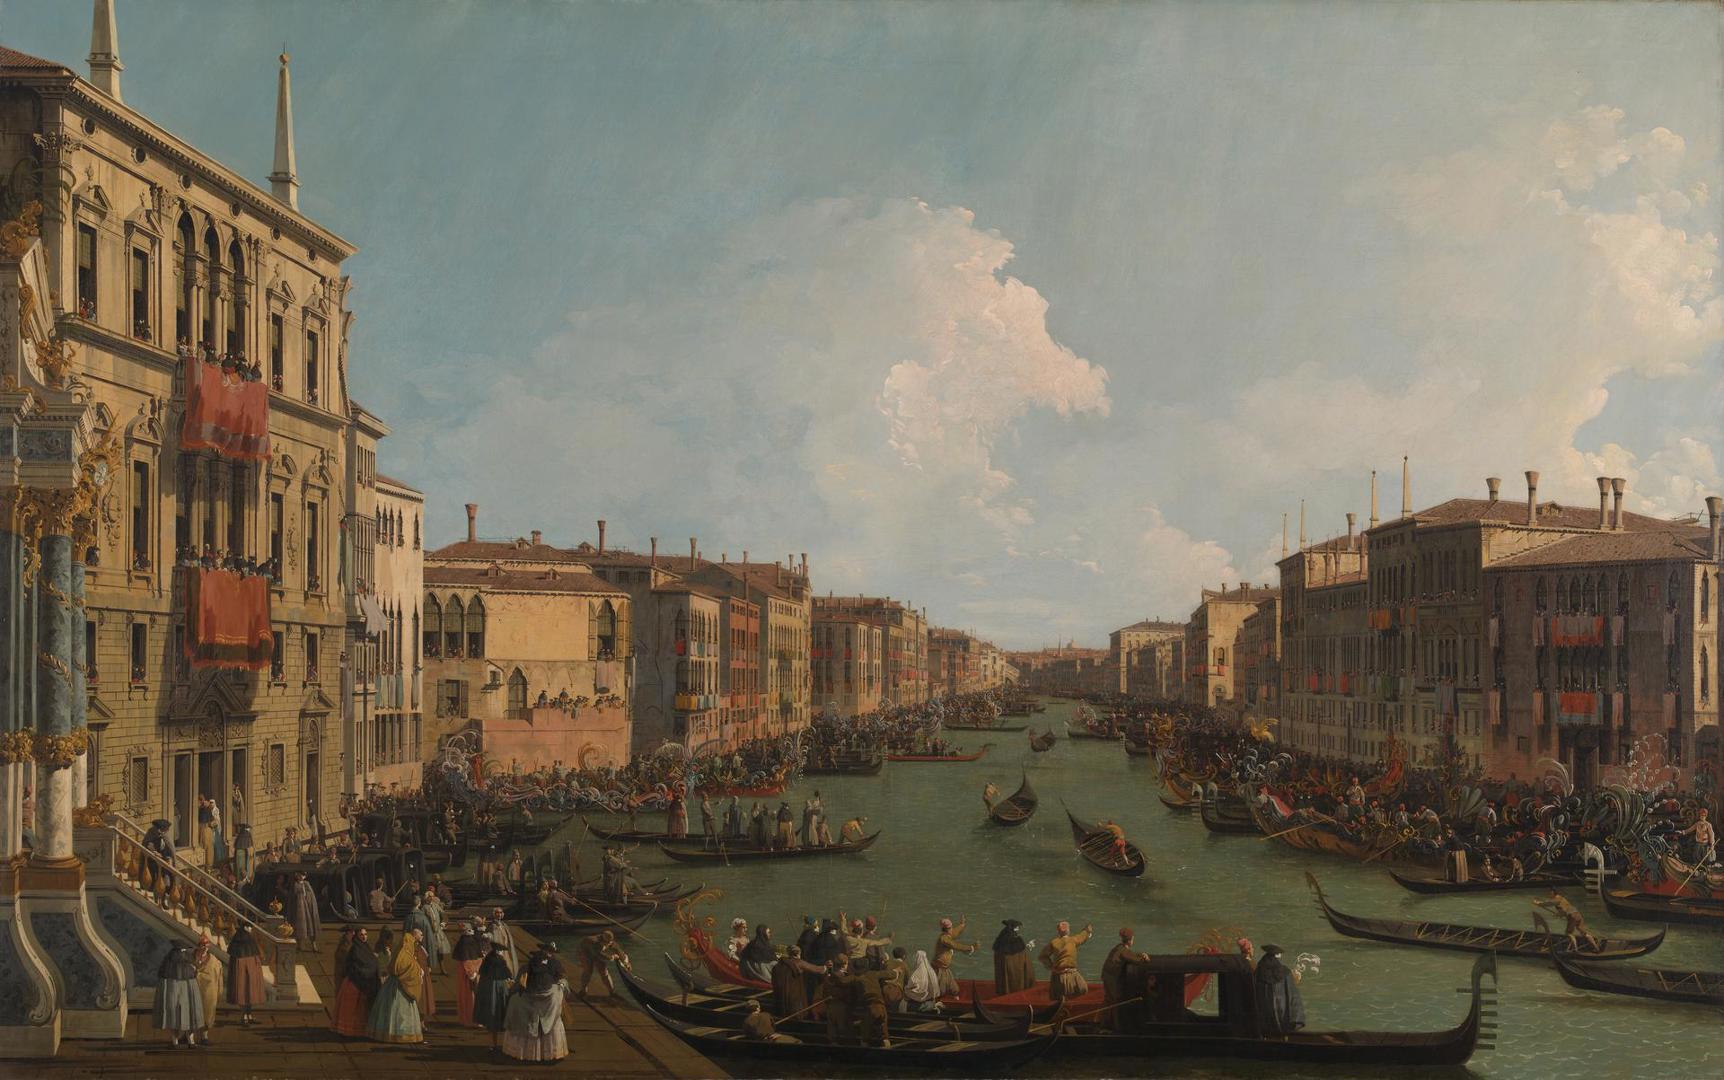 Venice: A Regatta on the Grand Canal by Canaletto